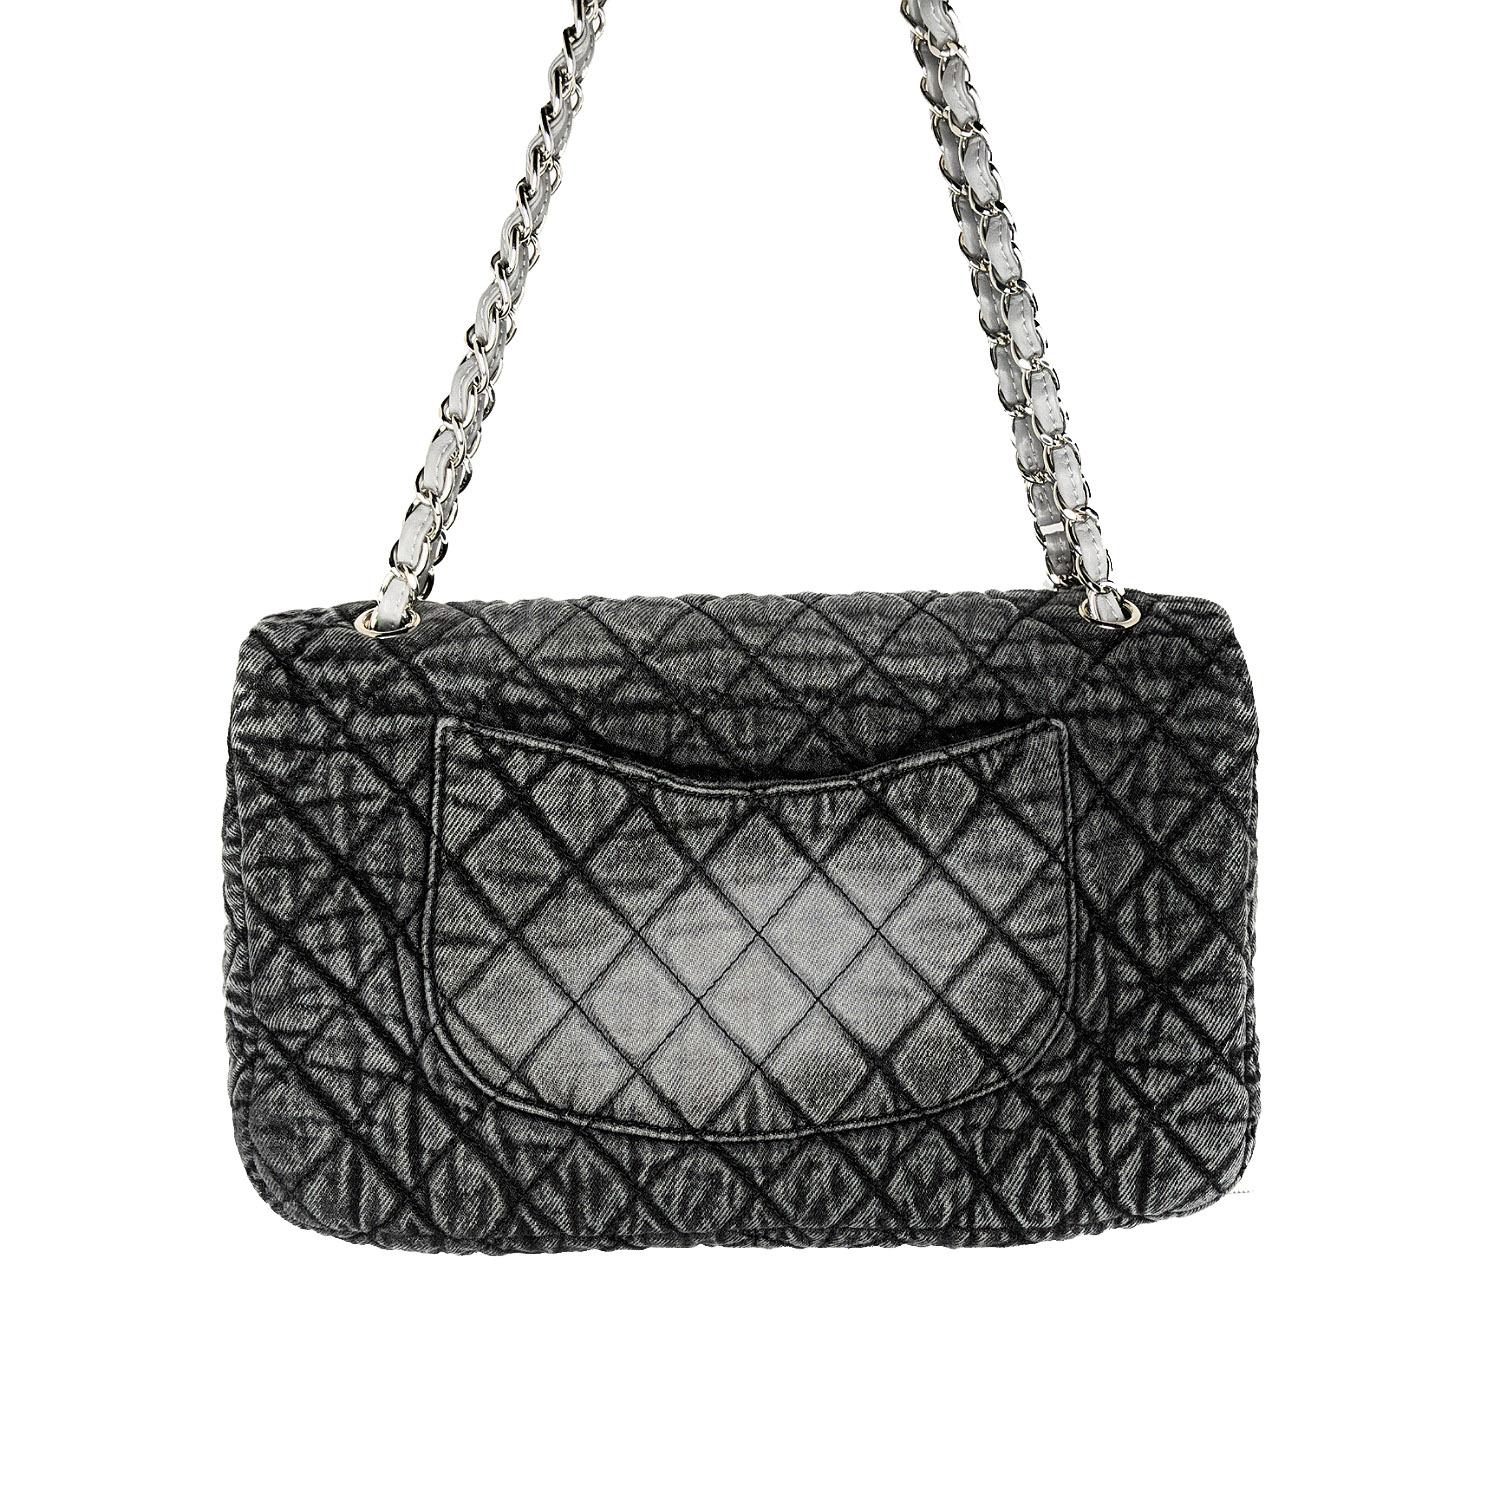 From the Chanel Cruise 2020 Bag Collection. This handbag is crafted of diamond quilted denim in gray and black. The shoulder bag features a leather threaded silver chain link shoulder strap, a rear flat pocket, and a polished silver Chanel CC turn